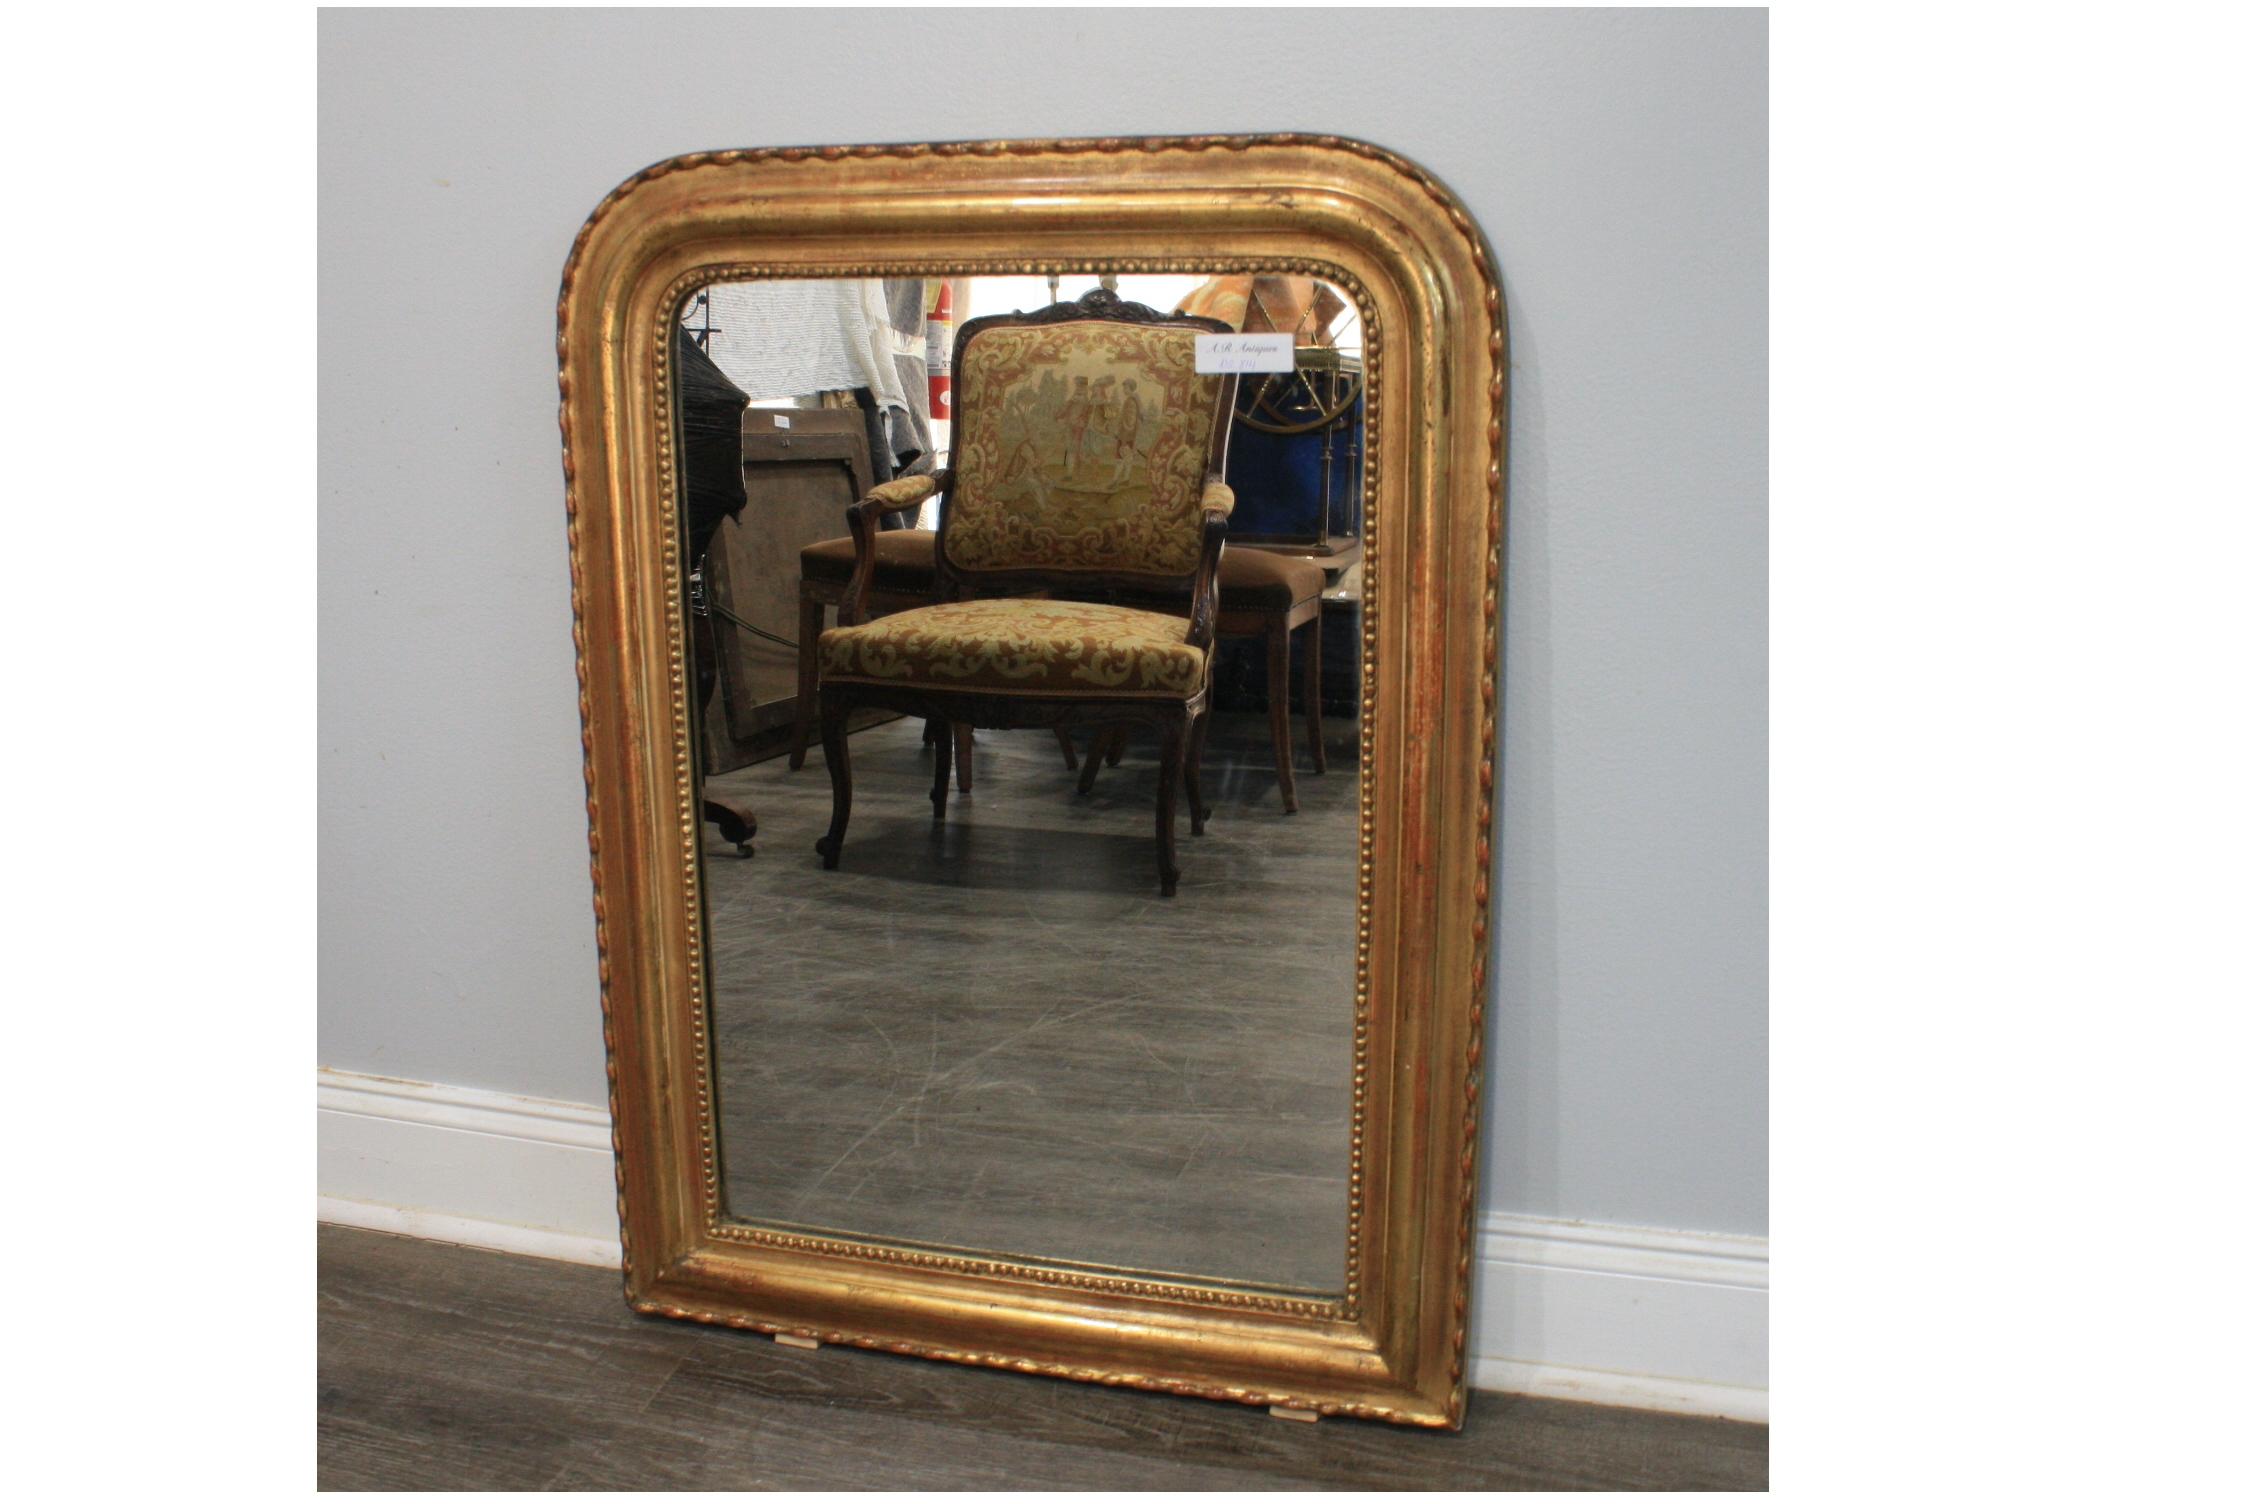 This 19th century French Louis-Philippe Mirror is covered of gold leaf and a serpentine pattern around it.